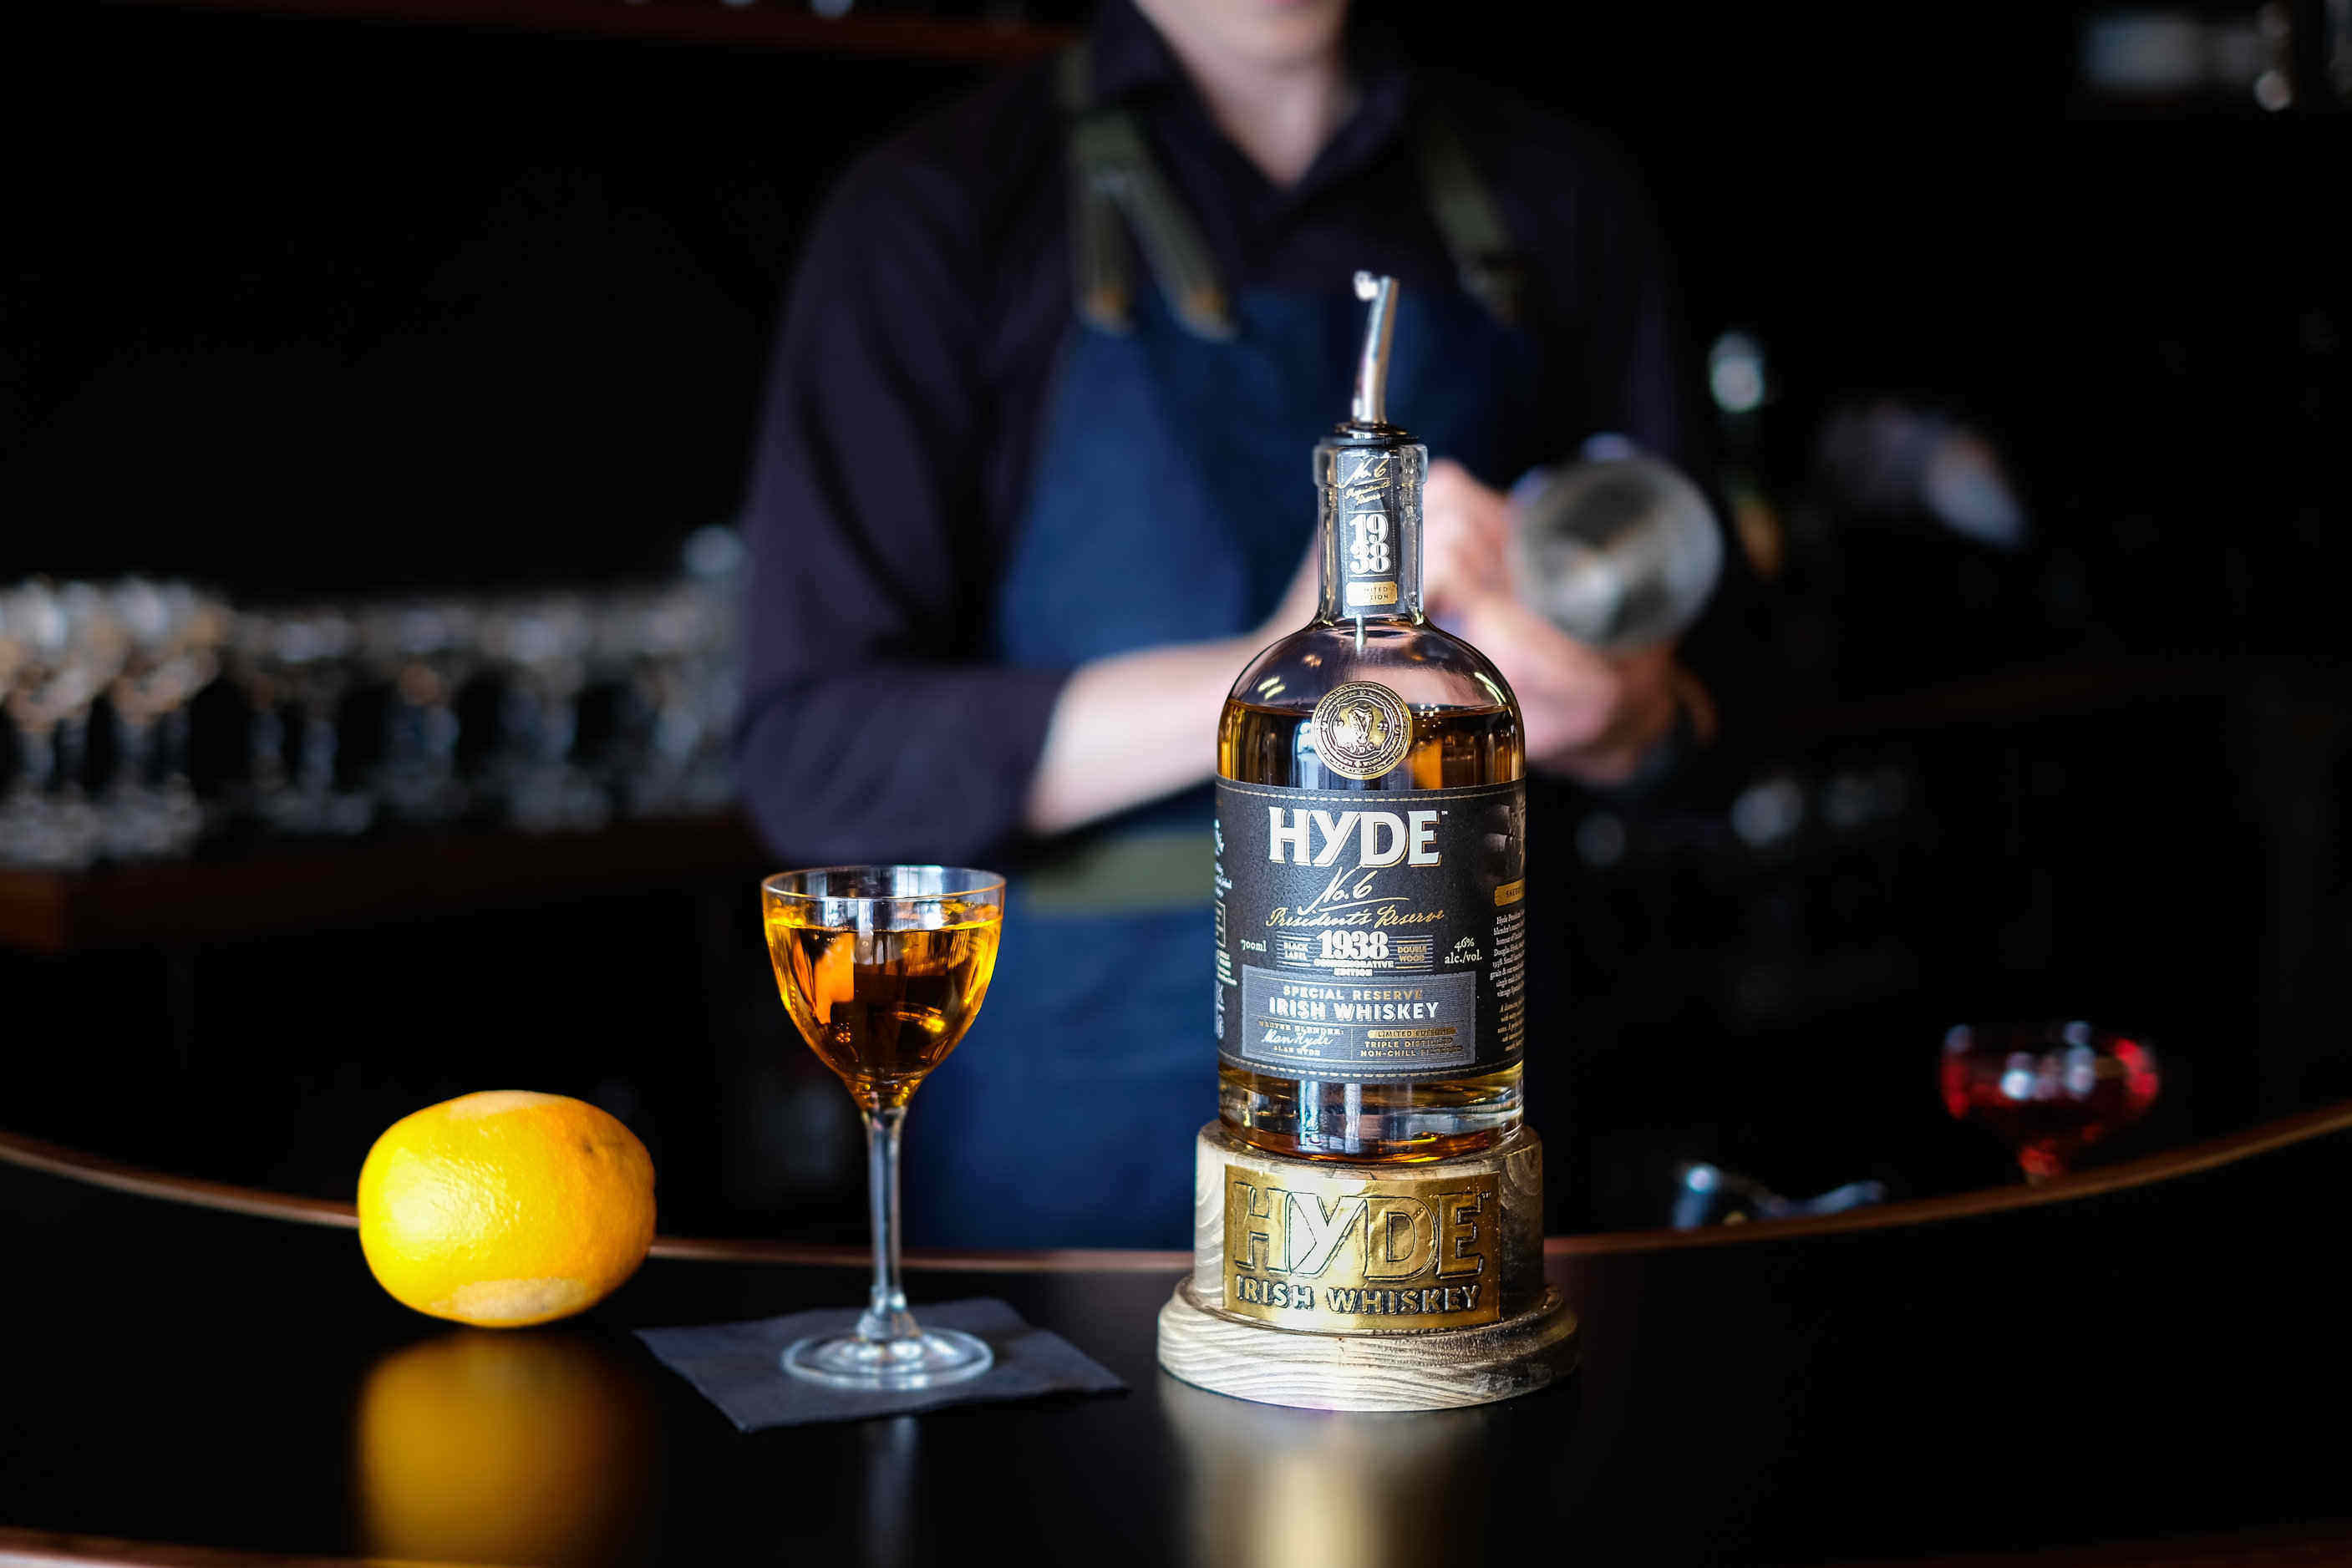 Hyde Irish Whiskey has won a Gold medal in the first round of the World Whiskies Awards for its No 6 Special Reserve.